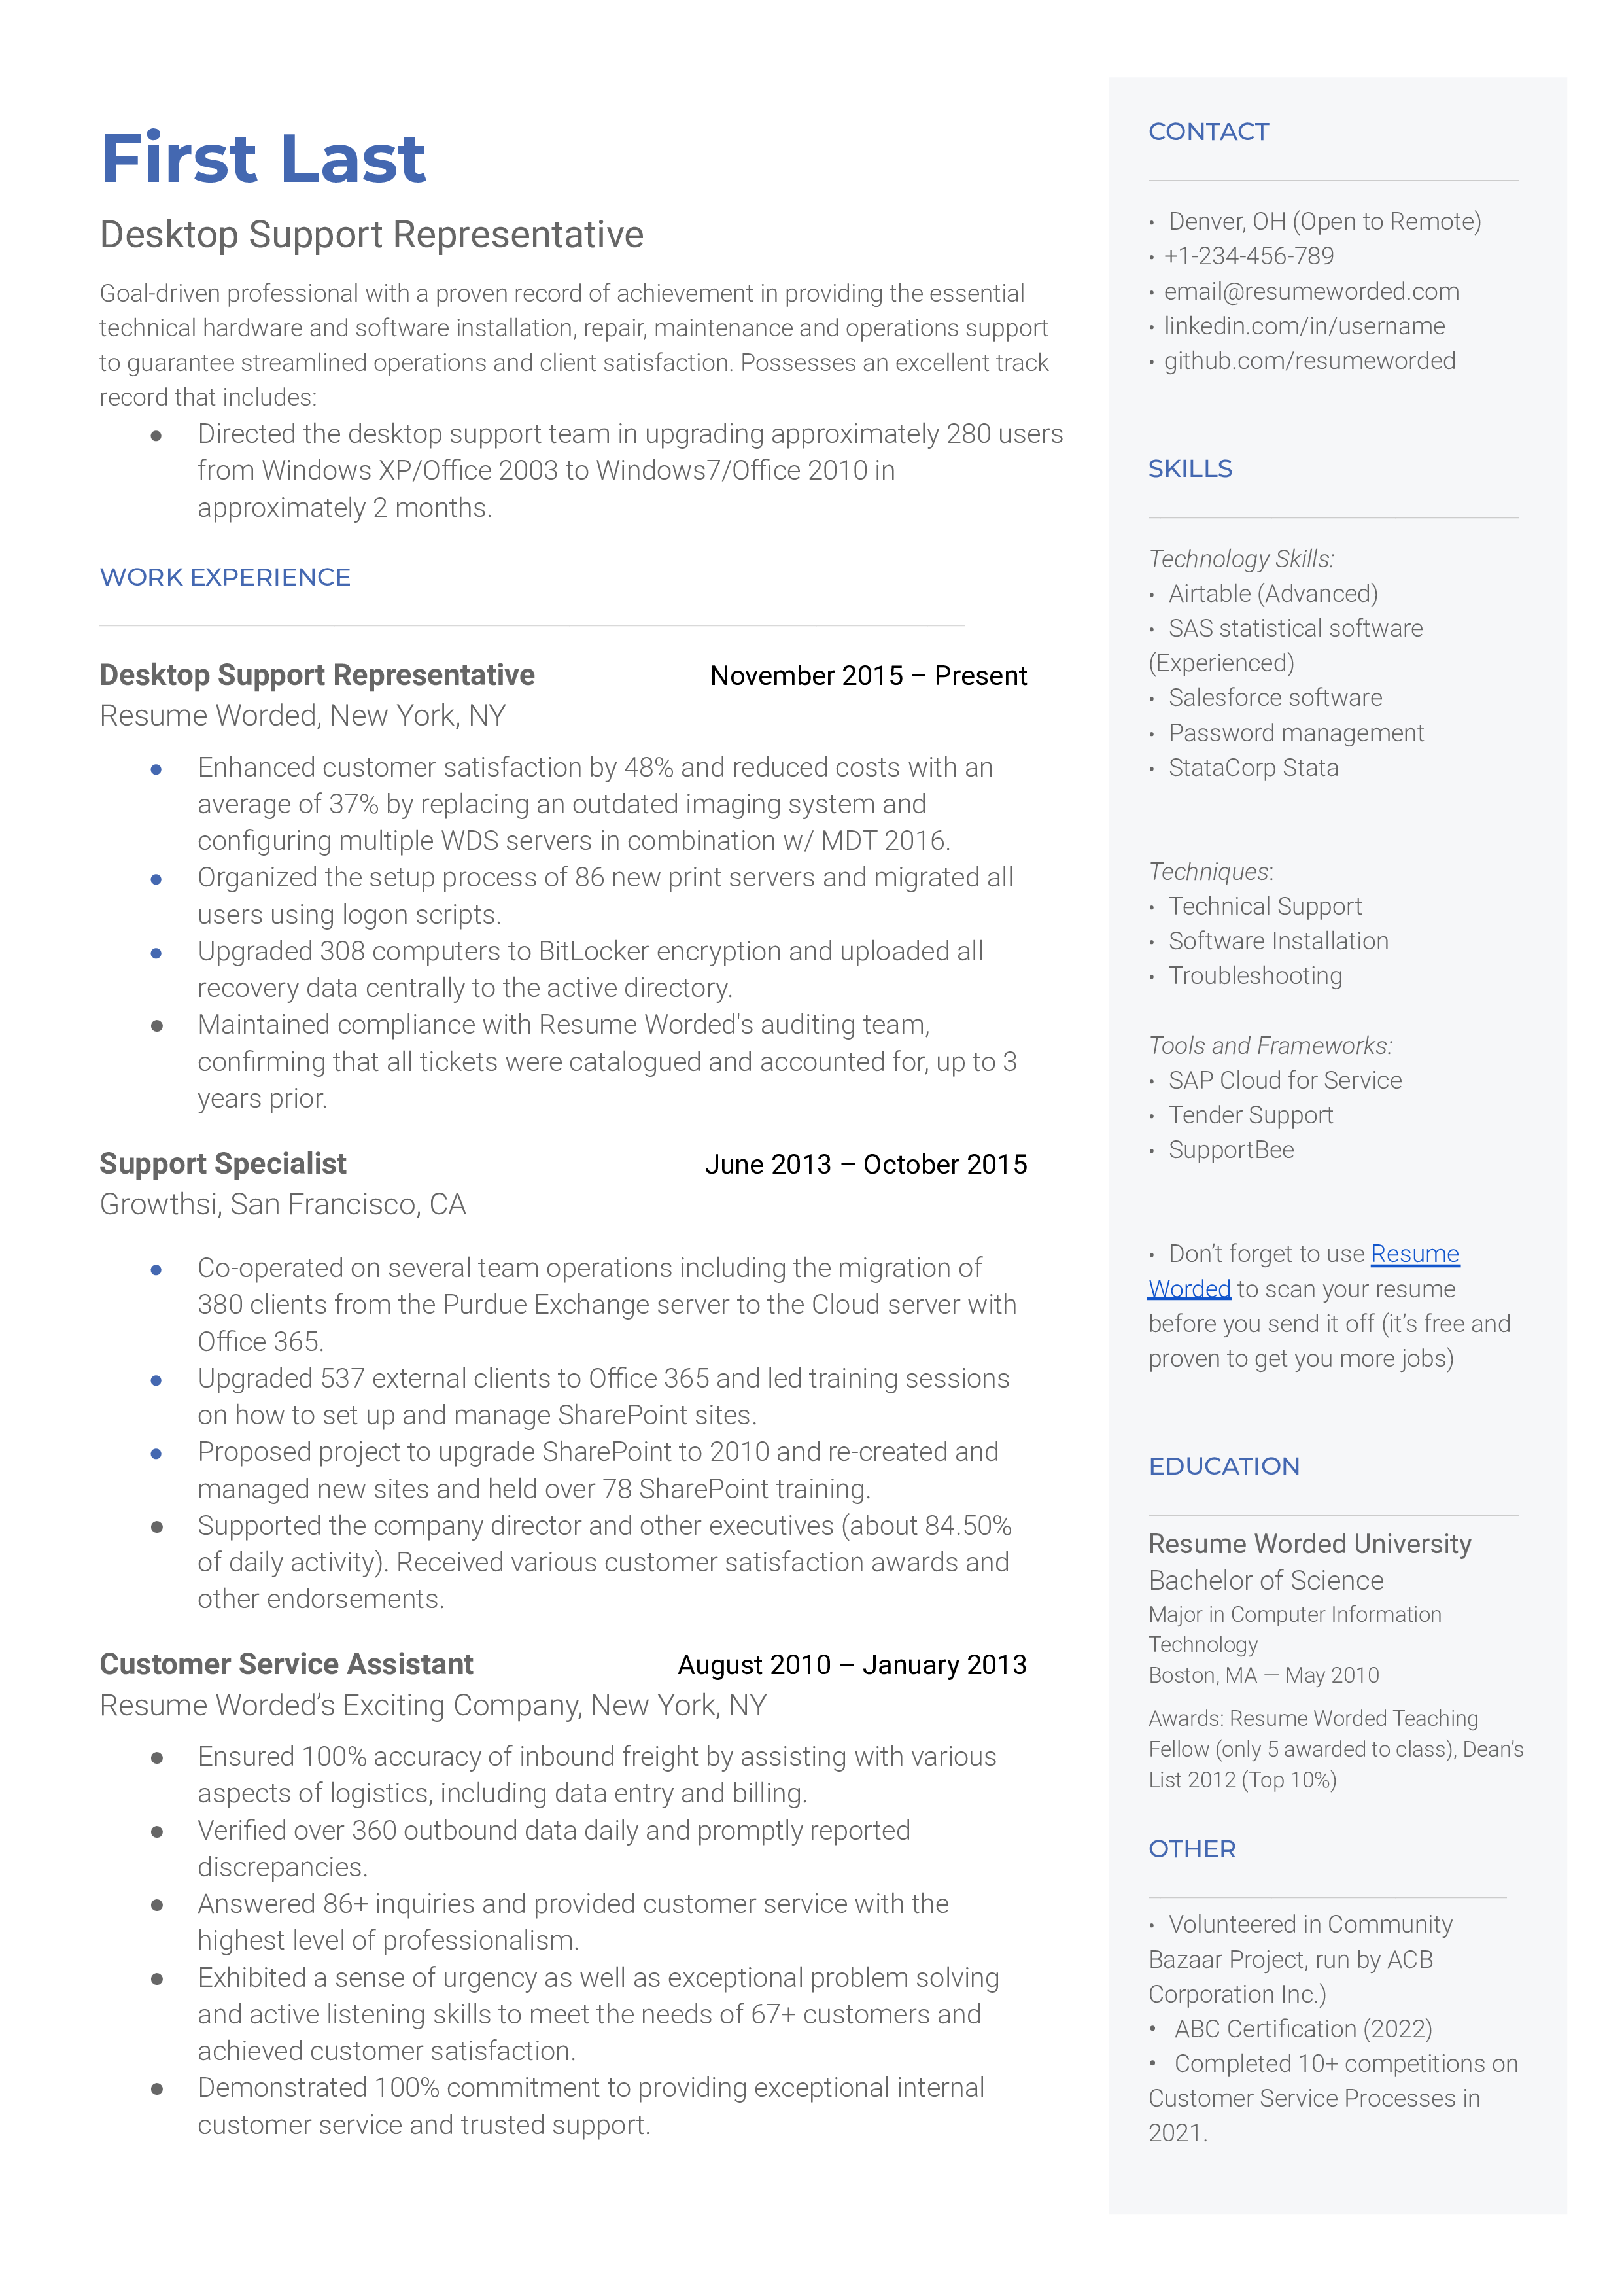 A Desktop Support Representative resume showing expertise in various Windows OS